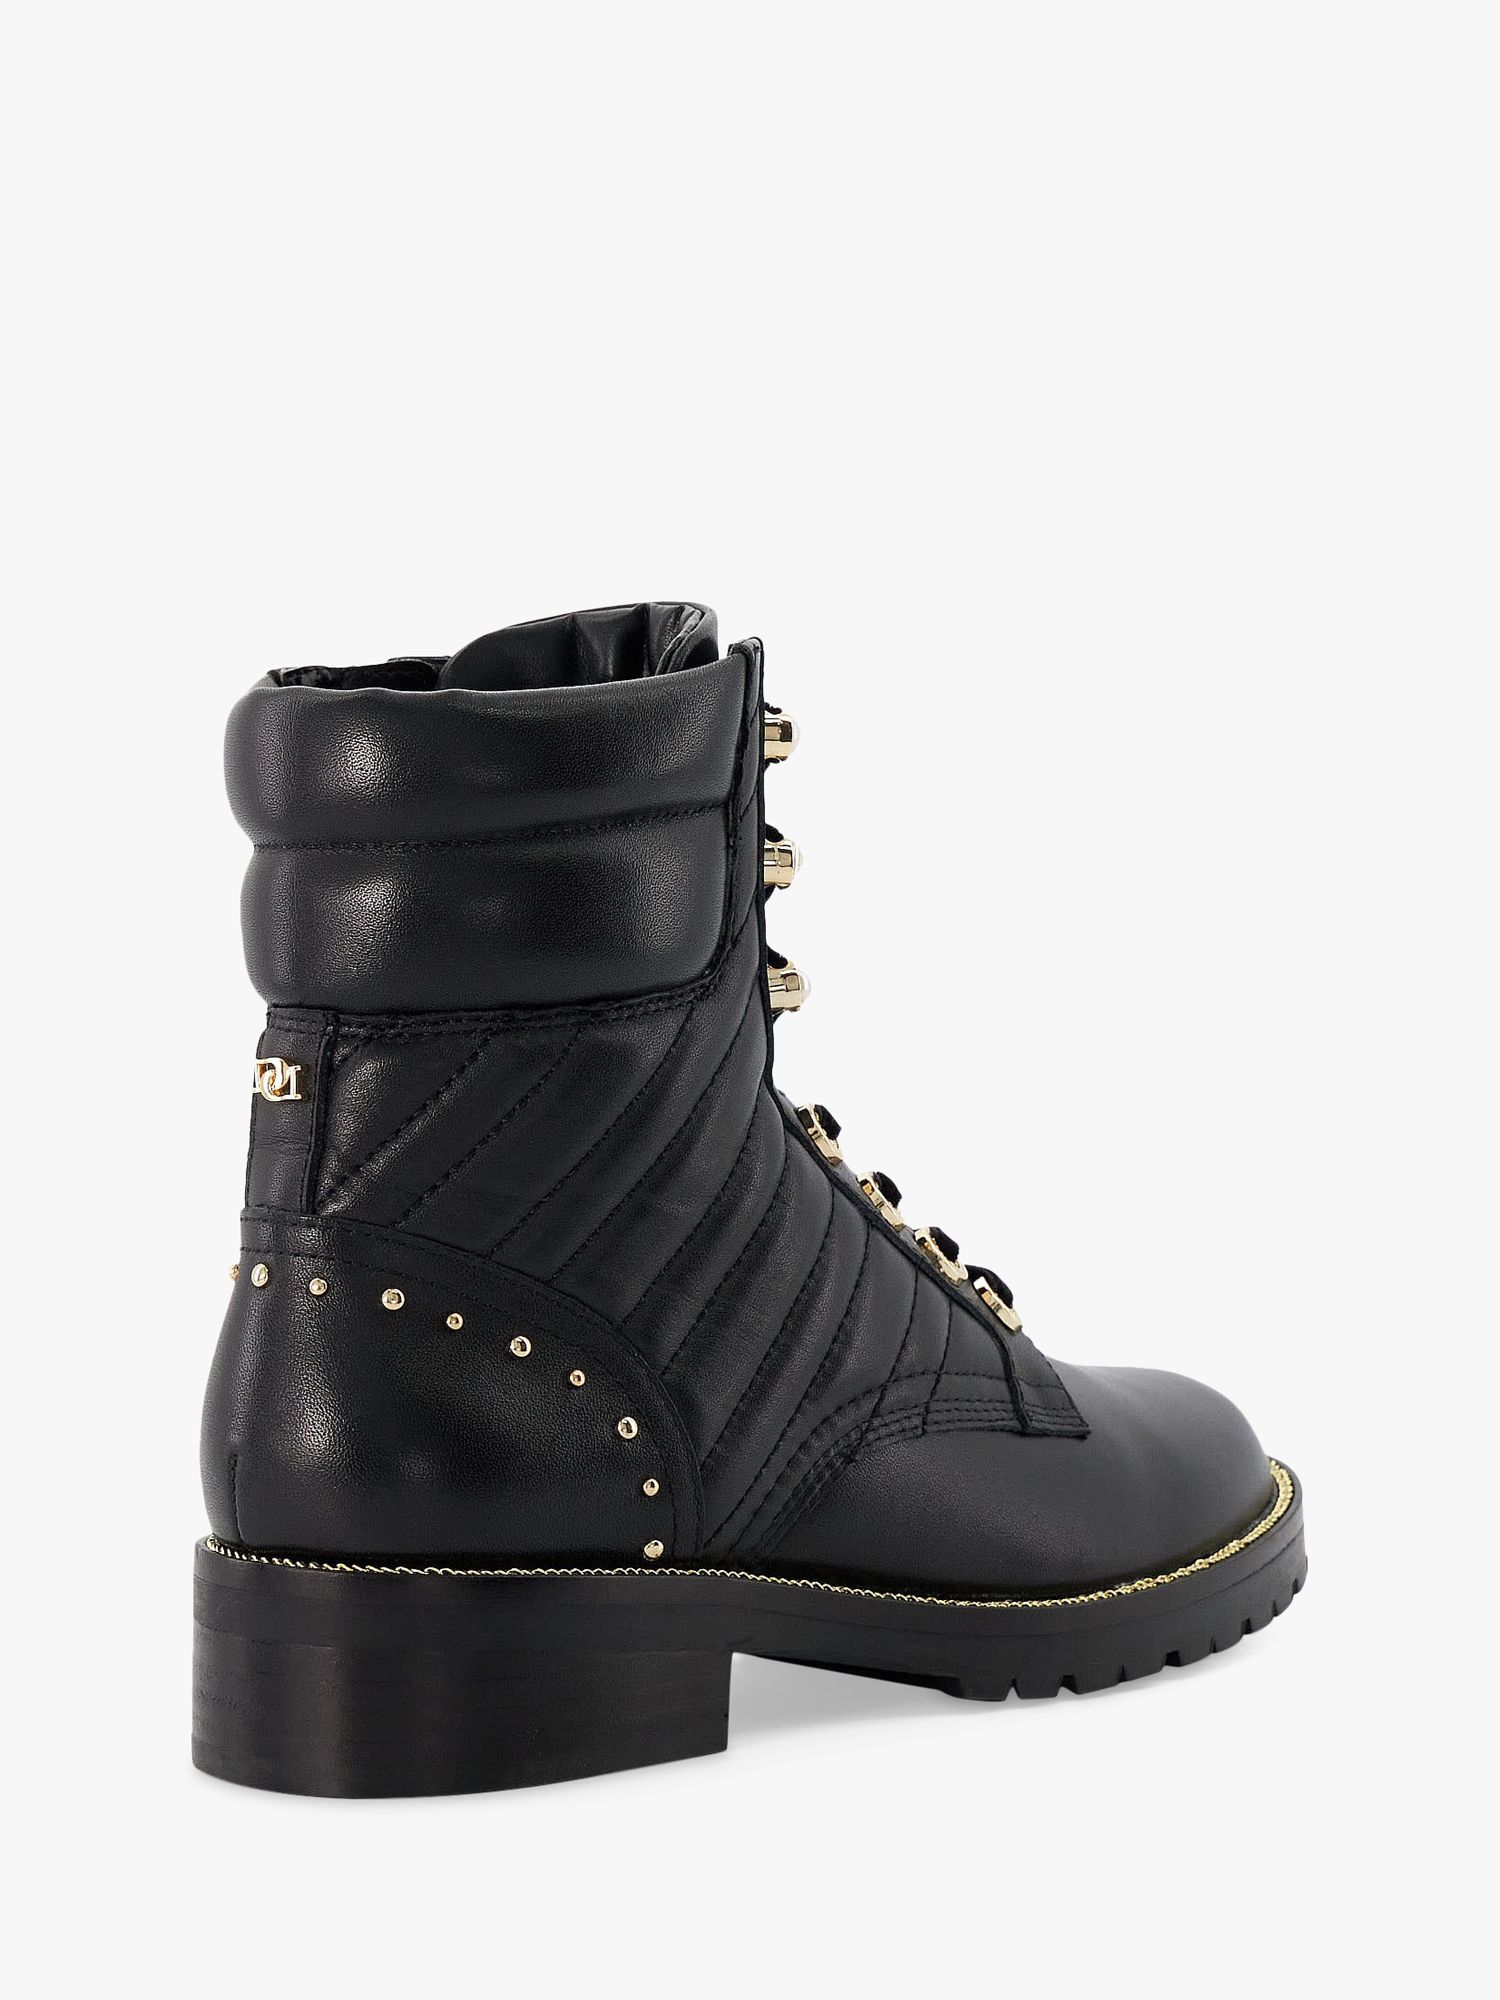 Buy Dune Pearlescent Leather Lace Up Ankle Boots, Black Online at johnlewis.com